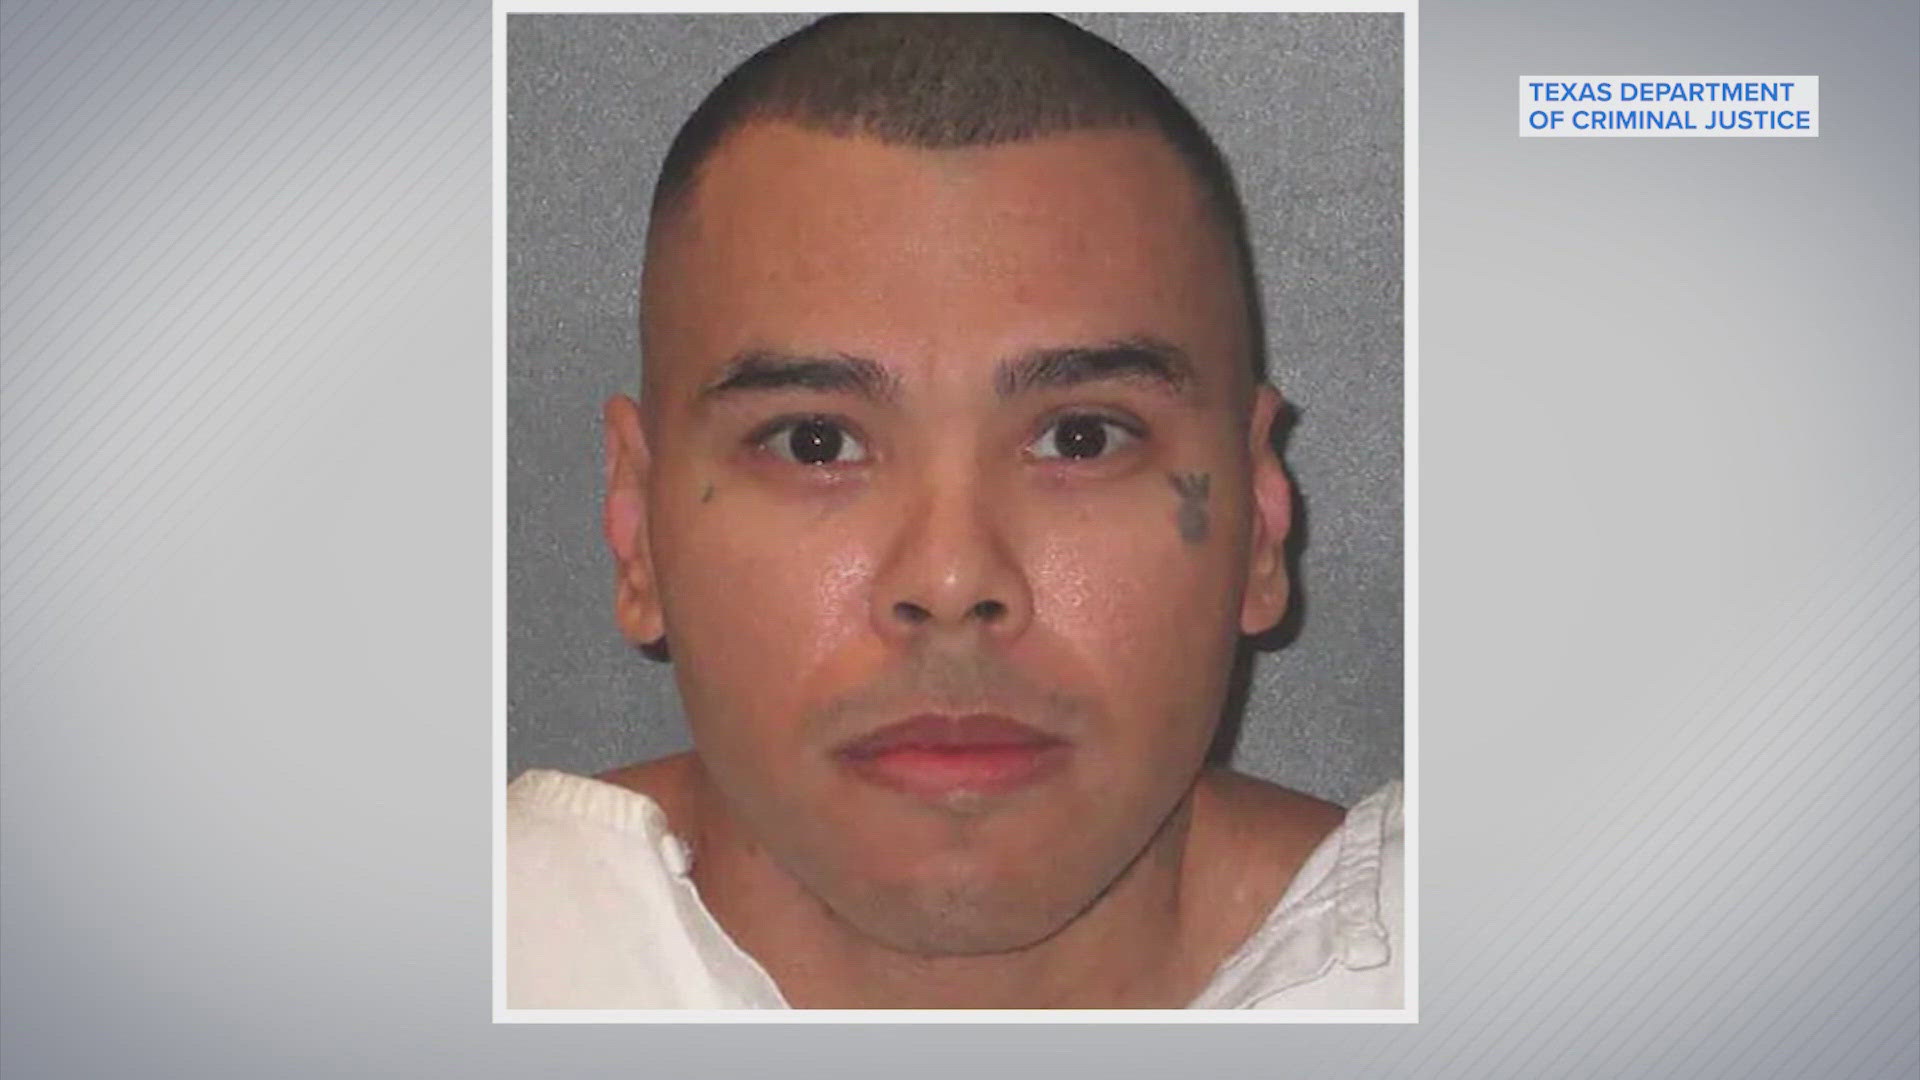 Ramiro Gonzales, 41, was condemned for fatally shooting Townsend after stealing drugs and money and kidnapping a woman in January 2001.